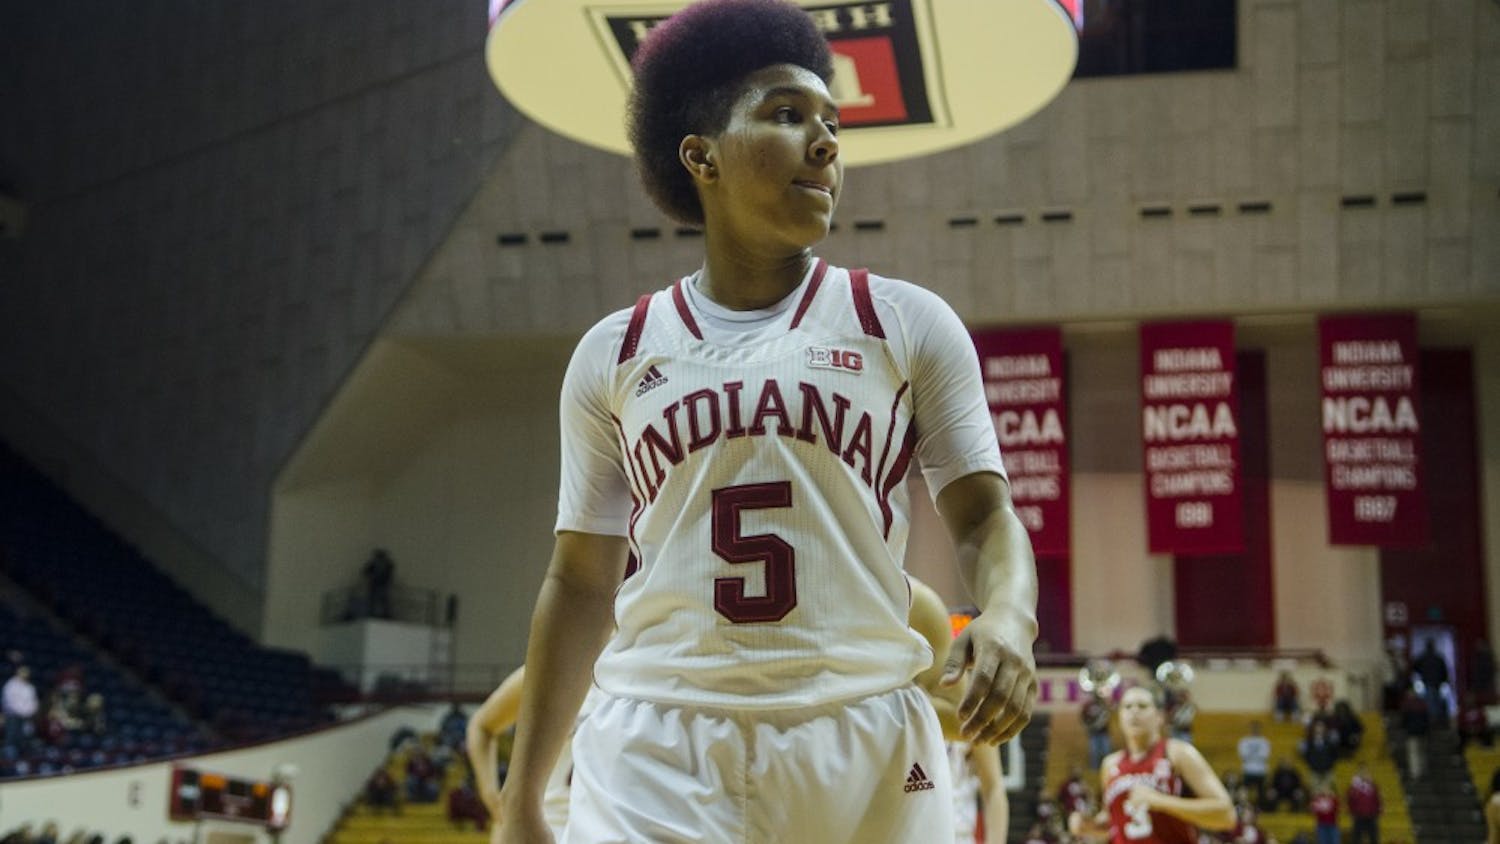 Sophomore guard Larryn Brooks walks towards the endline after losing to Nebraska 67-64 at Assembly Hall on February 21. Despite having the most play time and points of any Hoosier, Brooks announced her transfer from IU on Thursday. IU lost to Rutgers in the second round of the Big Ten Tournament on March 5 and finished their season 15-16.